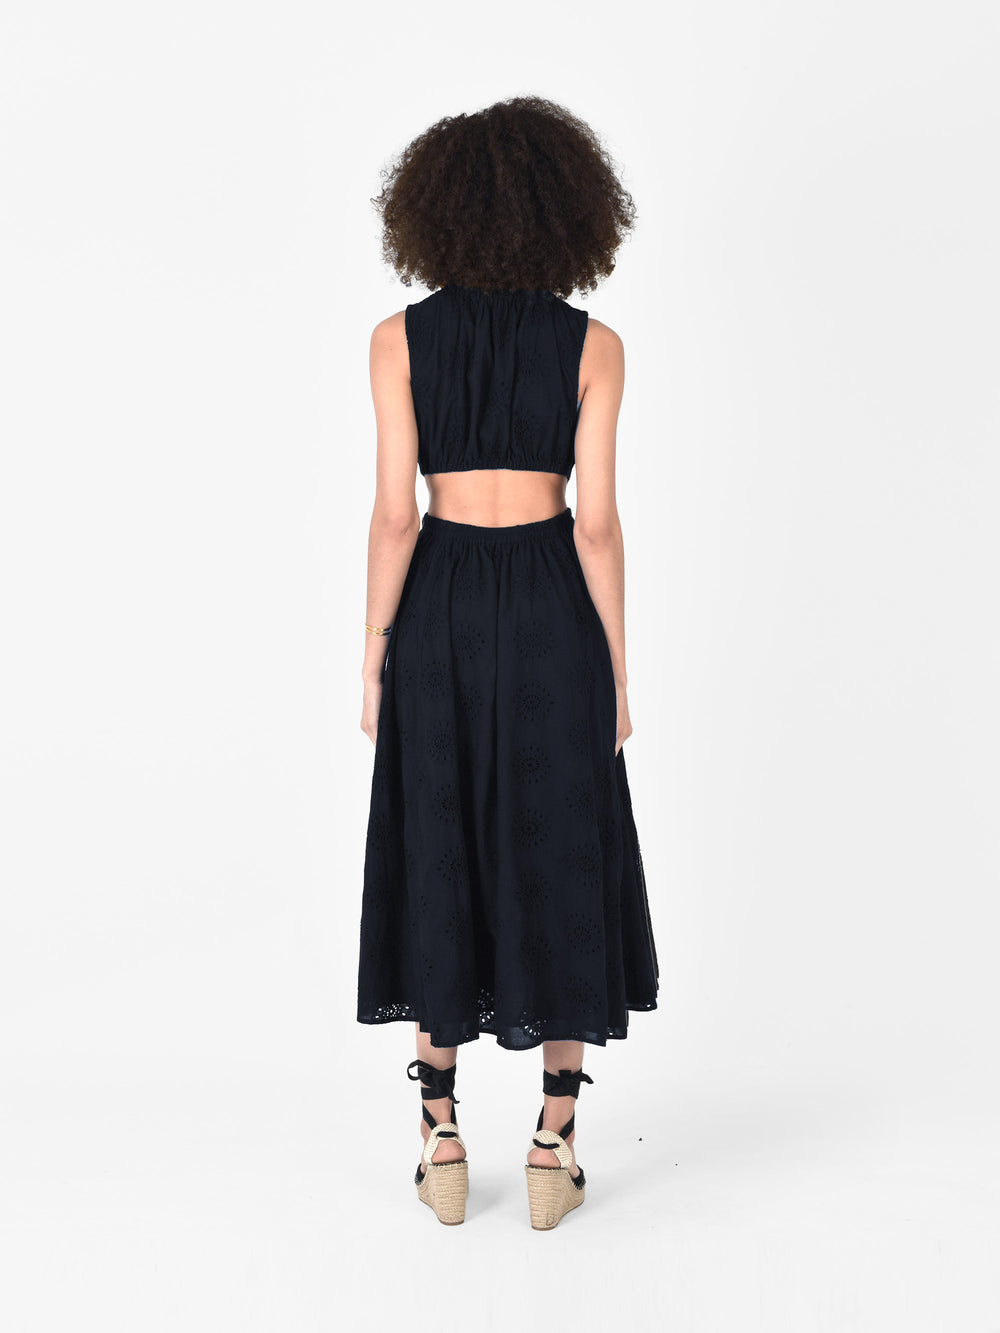 13 Zara Midi Dresses That Are at the Top of Our Shopping Wishlist